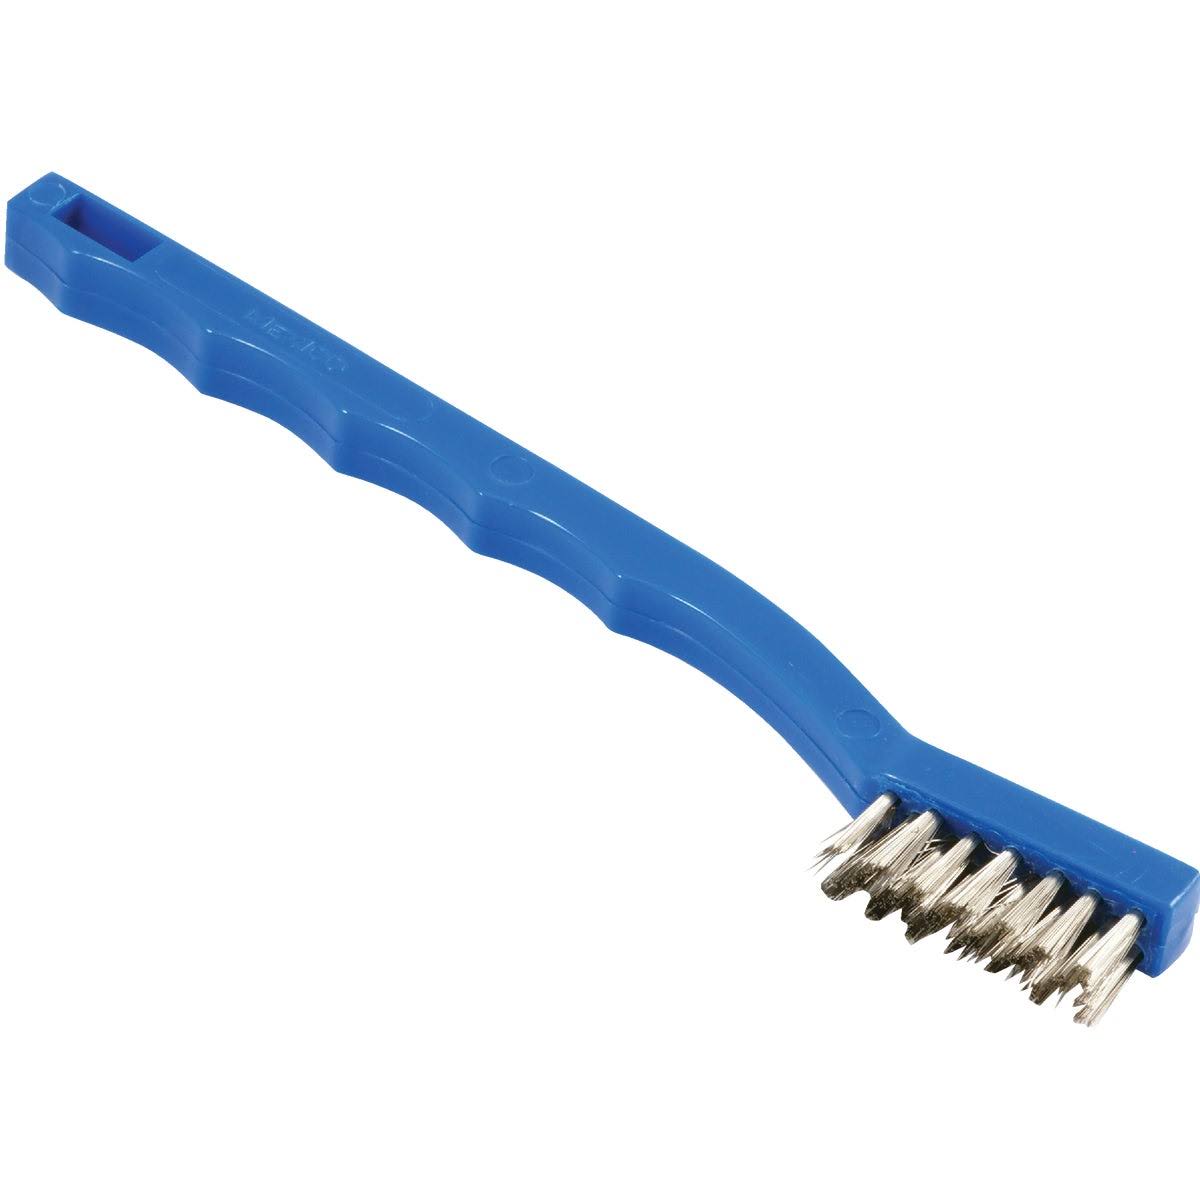 Forney 70488 Wire Brush - Plastic Handle, 7-1/4"x.006"